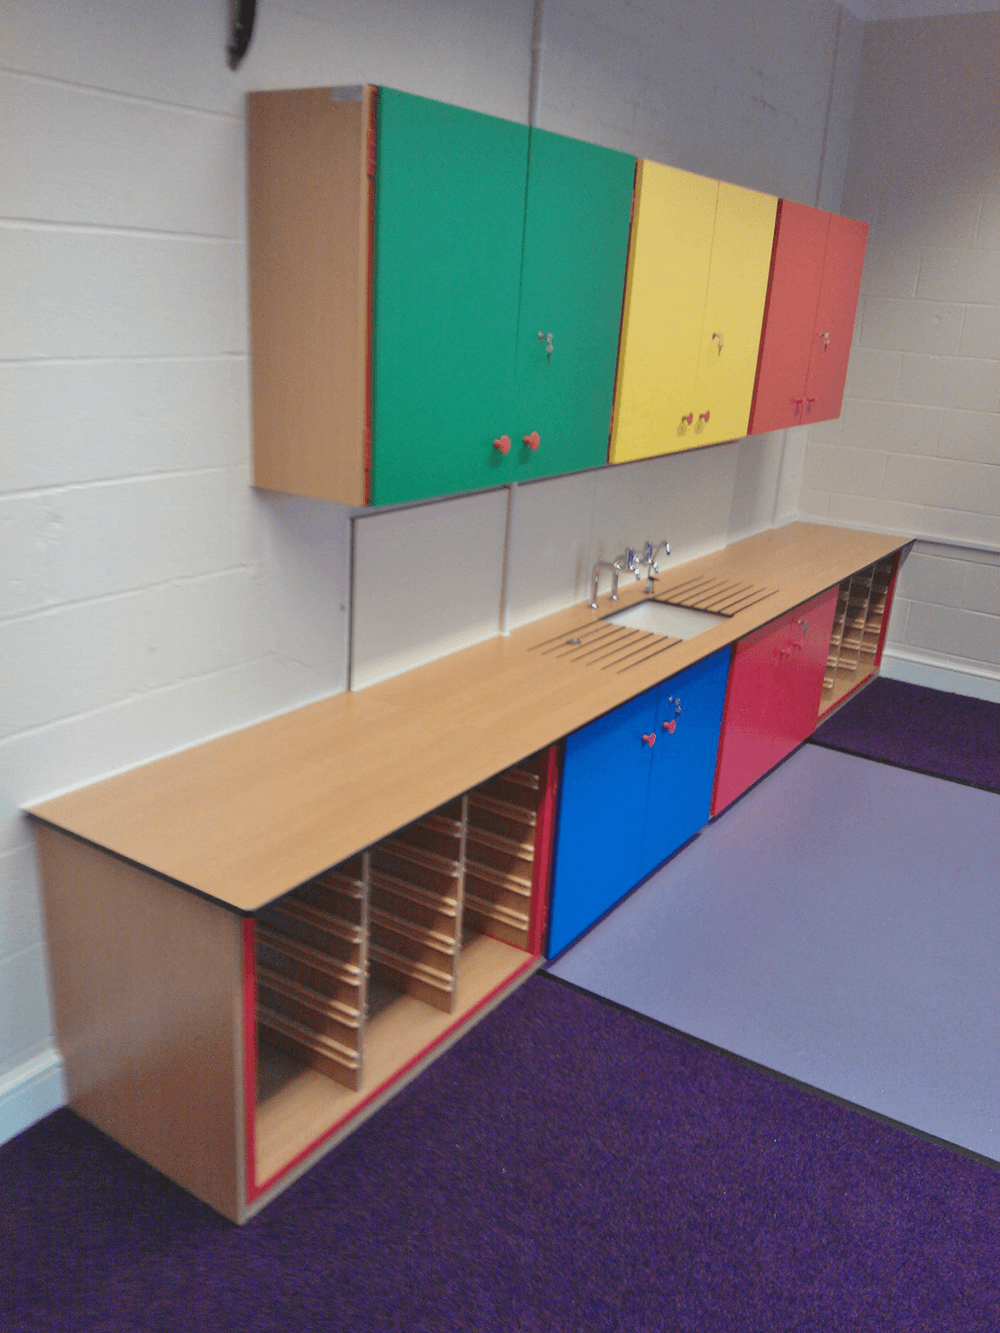 coloured storage units and sink